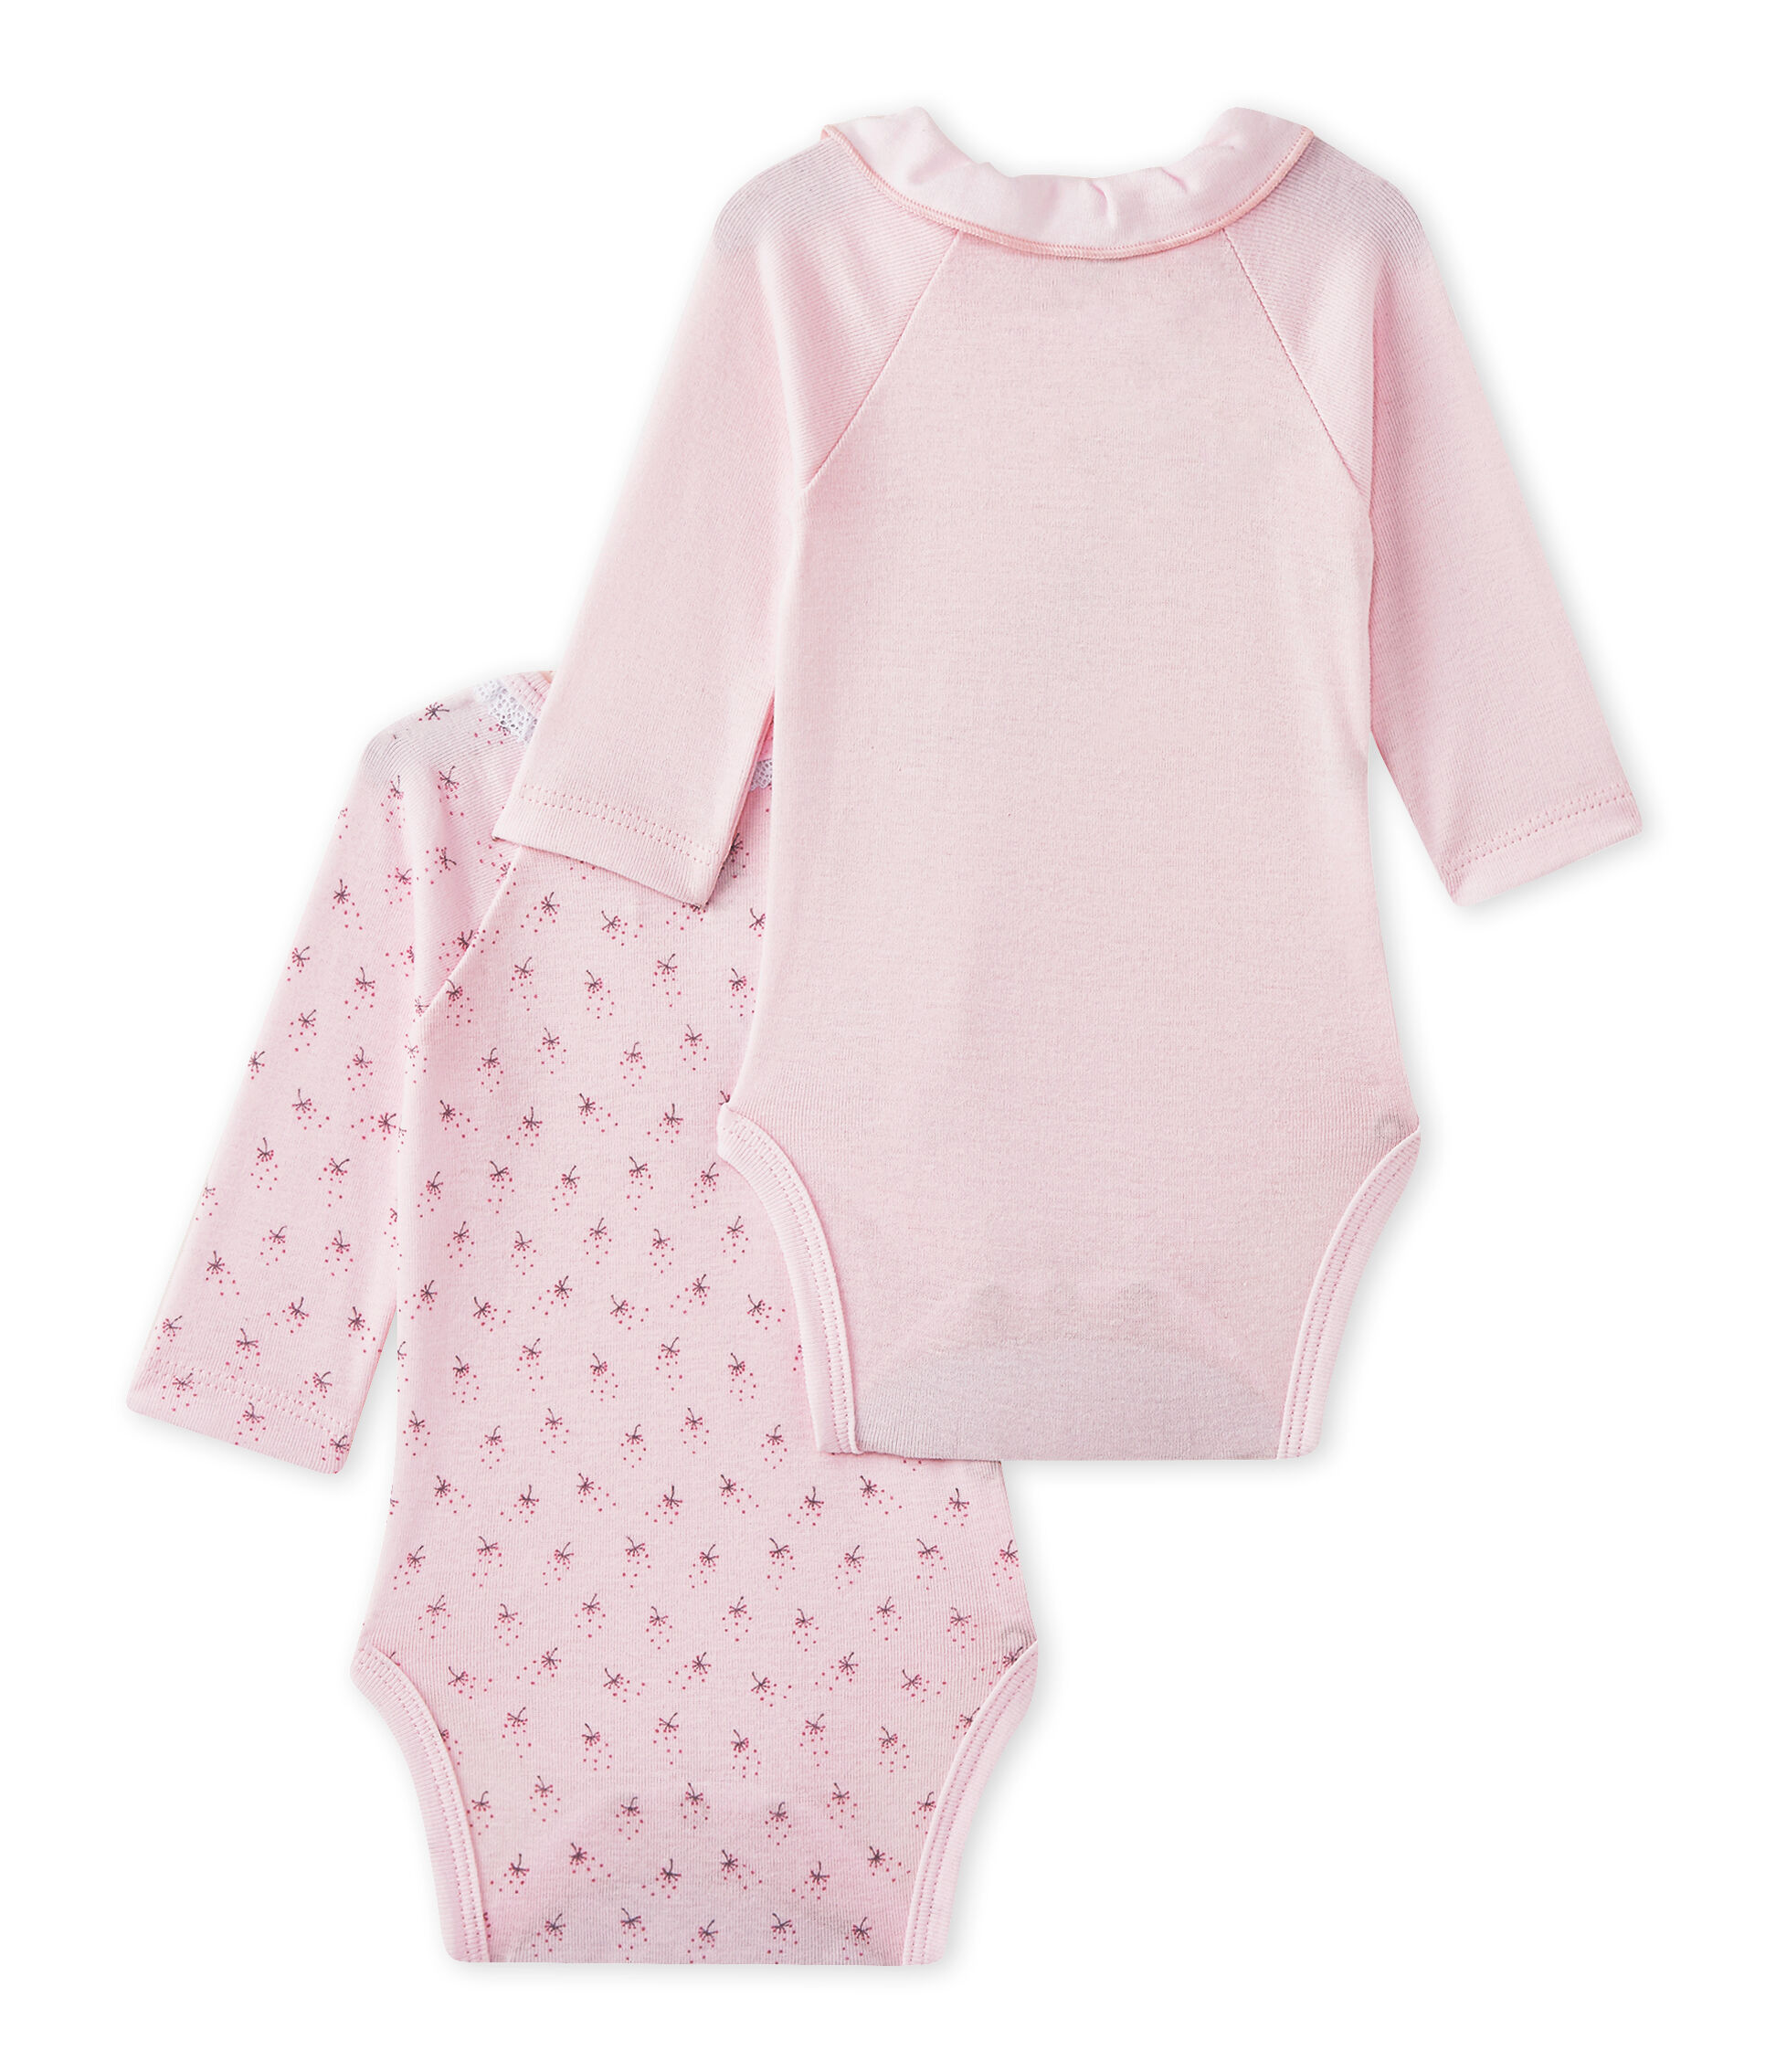 Petit Béguin Pack of 2 baby girls long-sleeved bodysuits cotton. 